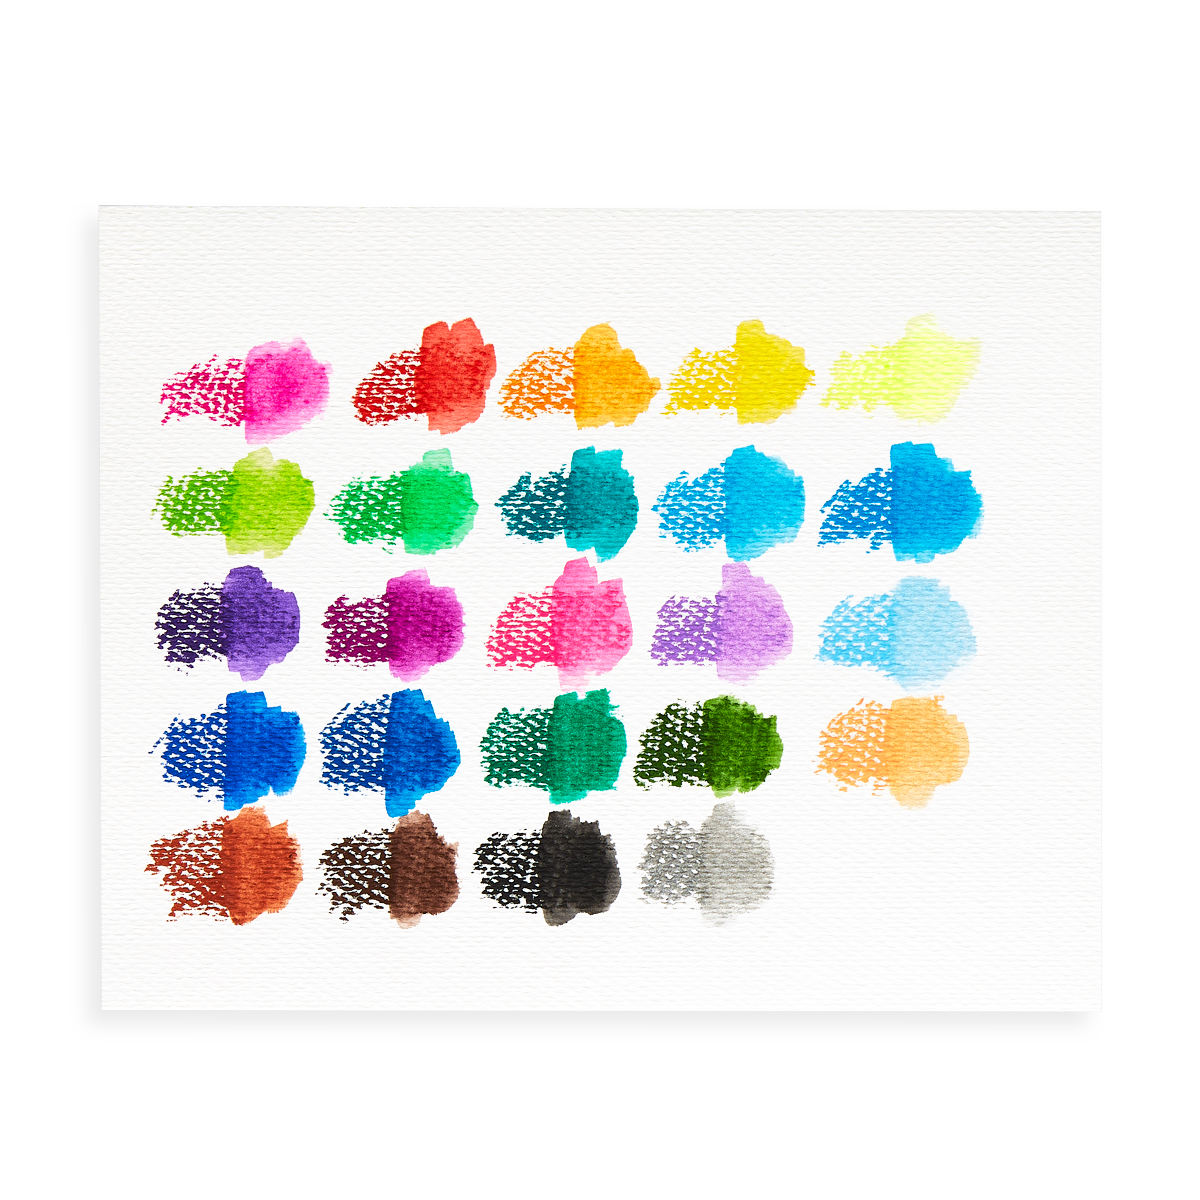 Ooly Smooth Stix Watercolor Crayon Set of 6